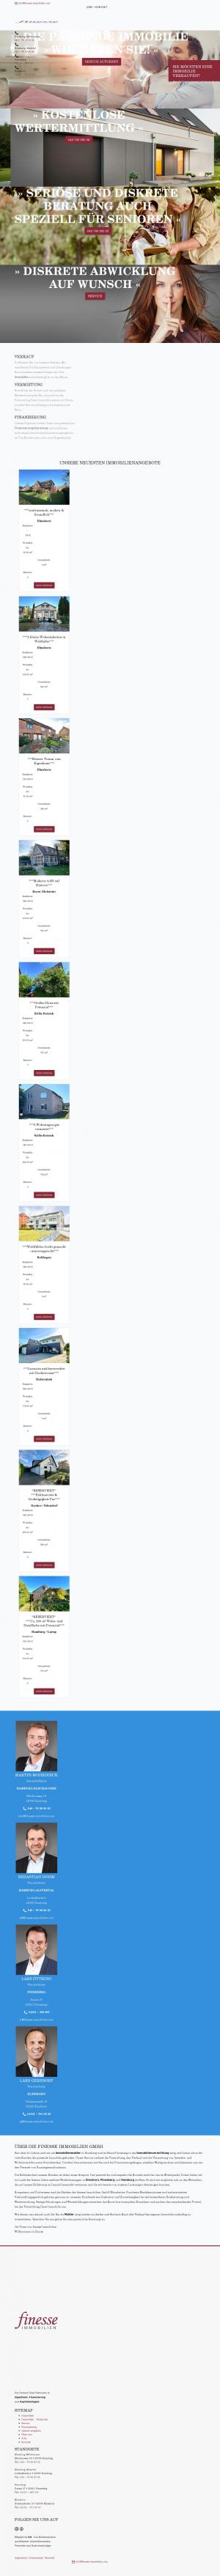 www.finesse-immobilien.com